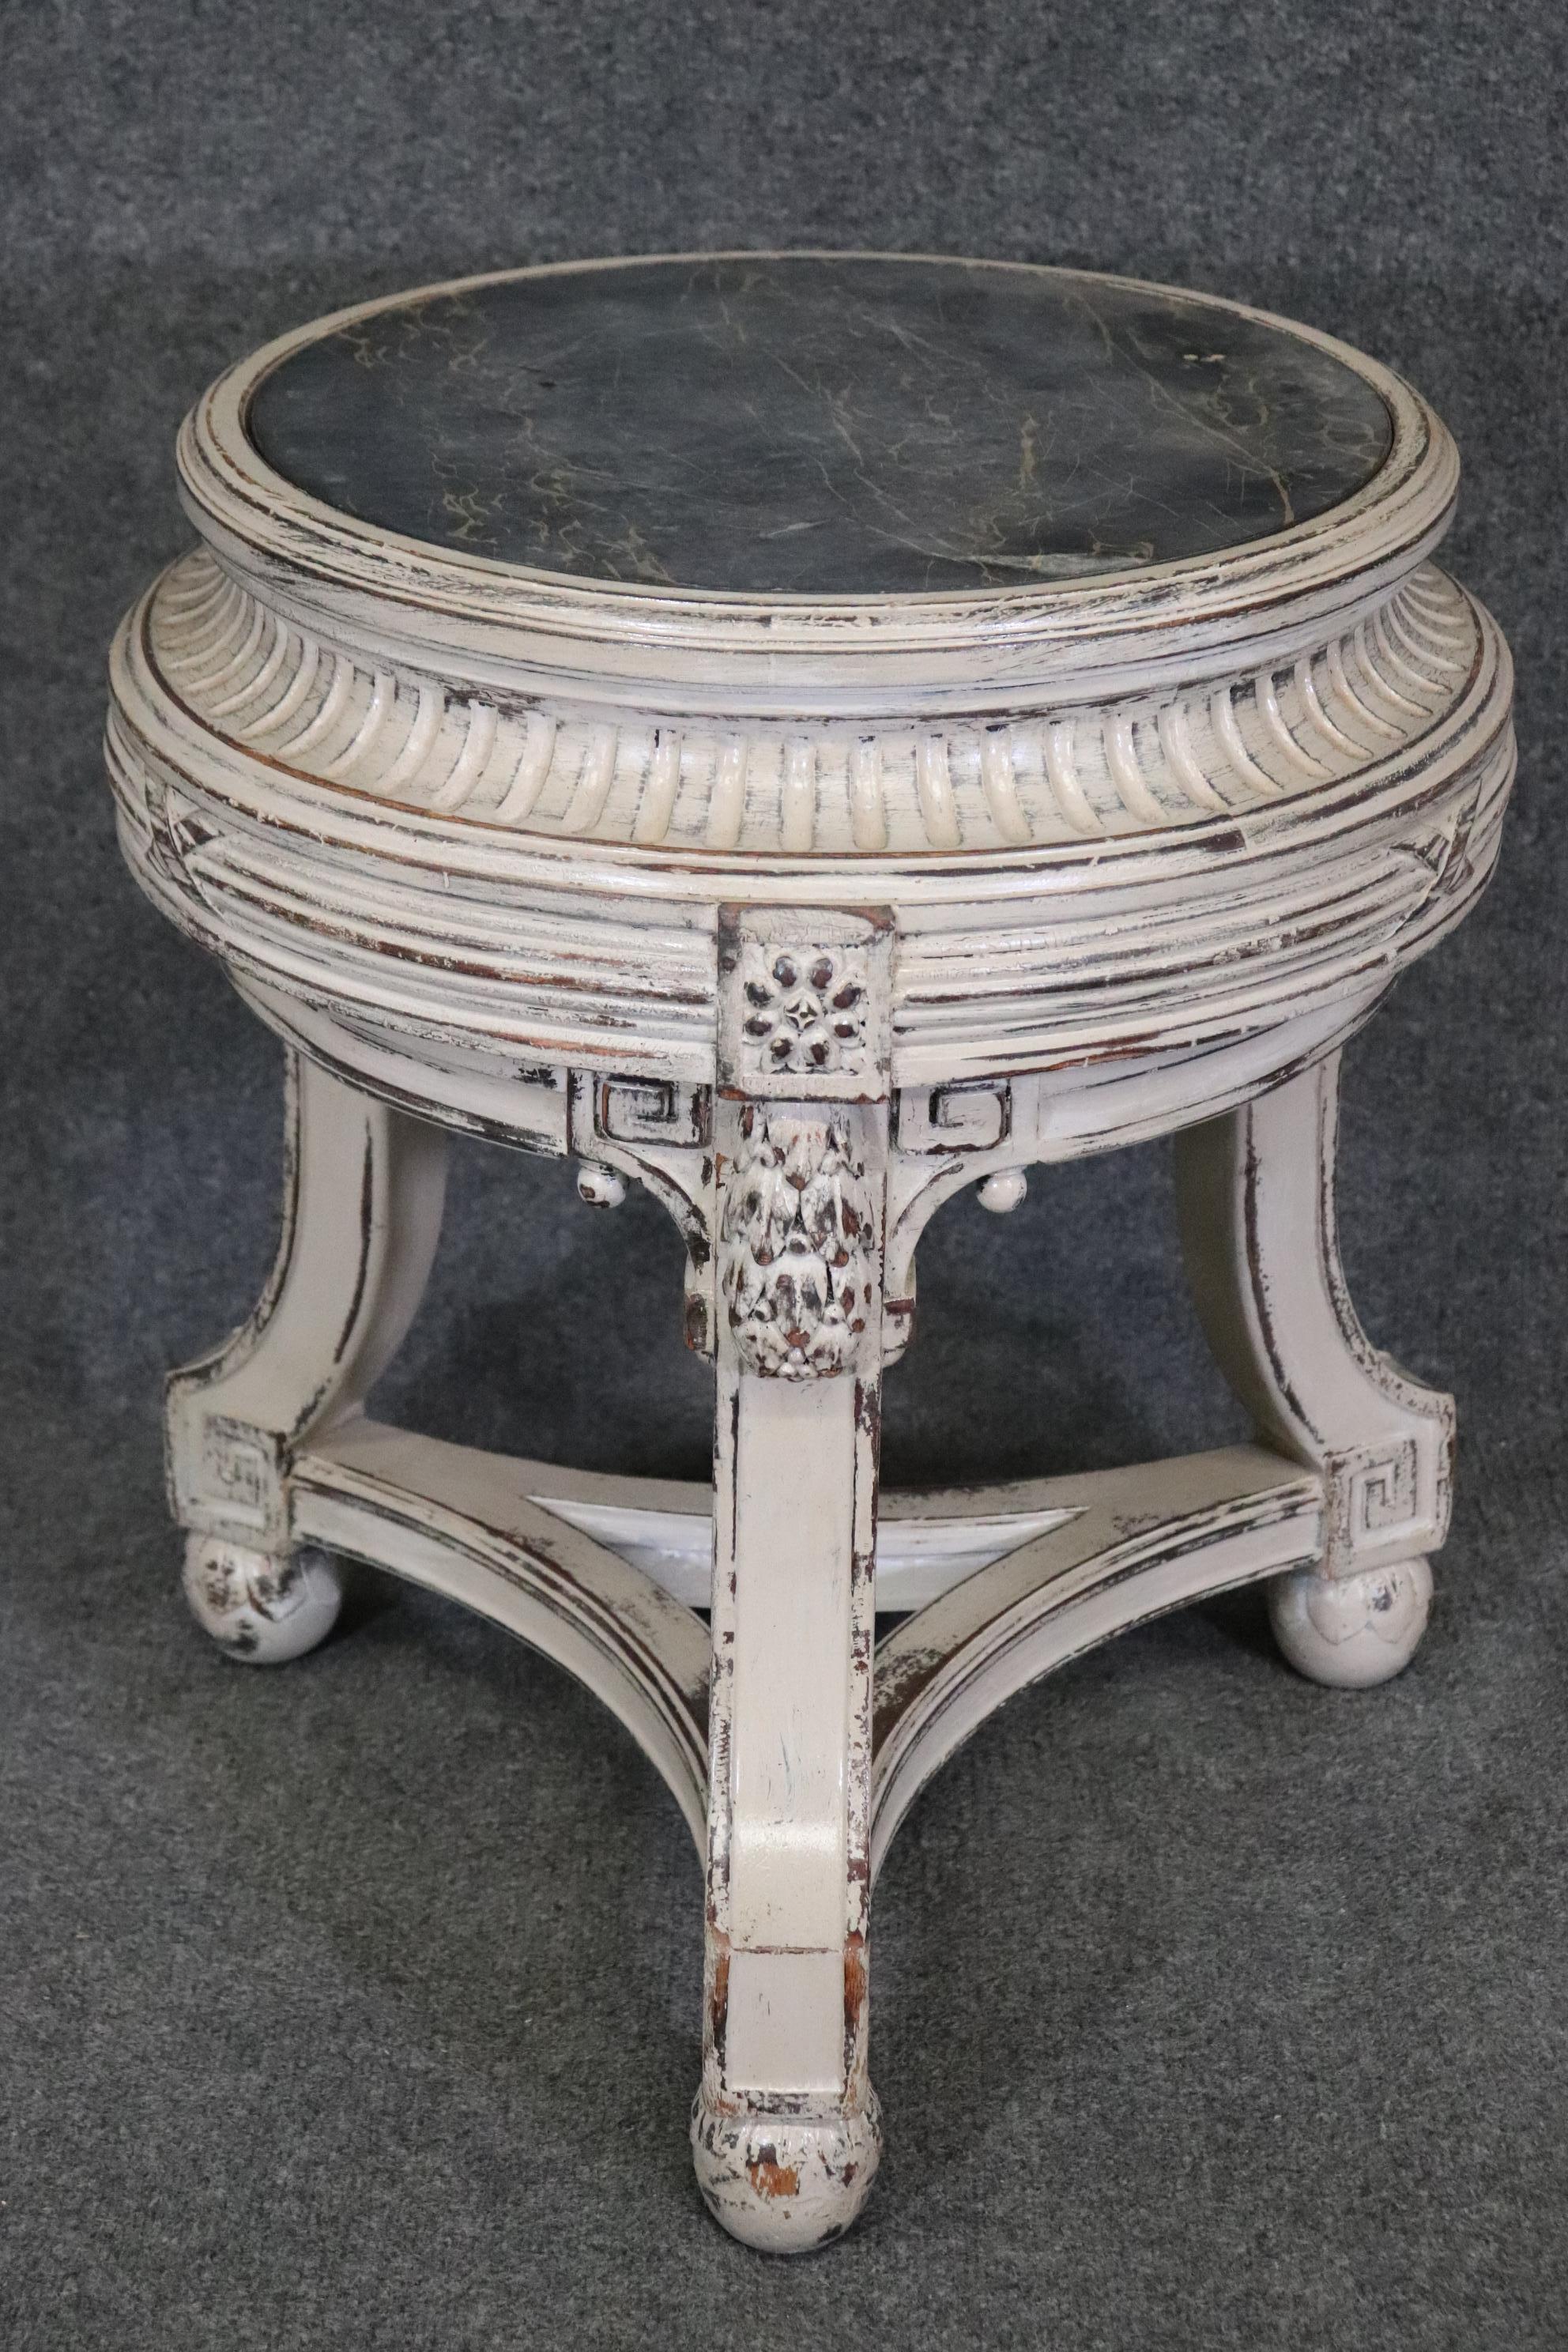 French Regency Style Distressed Finished Marble Top Round End Table Pedestal In Good Condition For Sale In Swedesboro, NJ